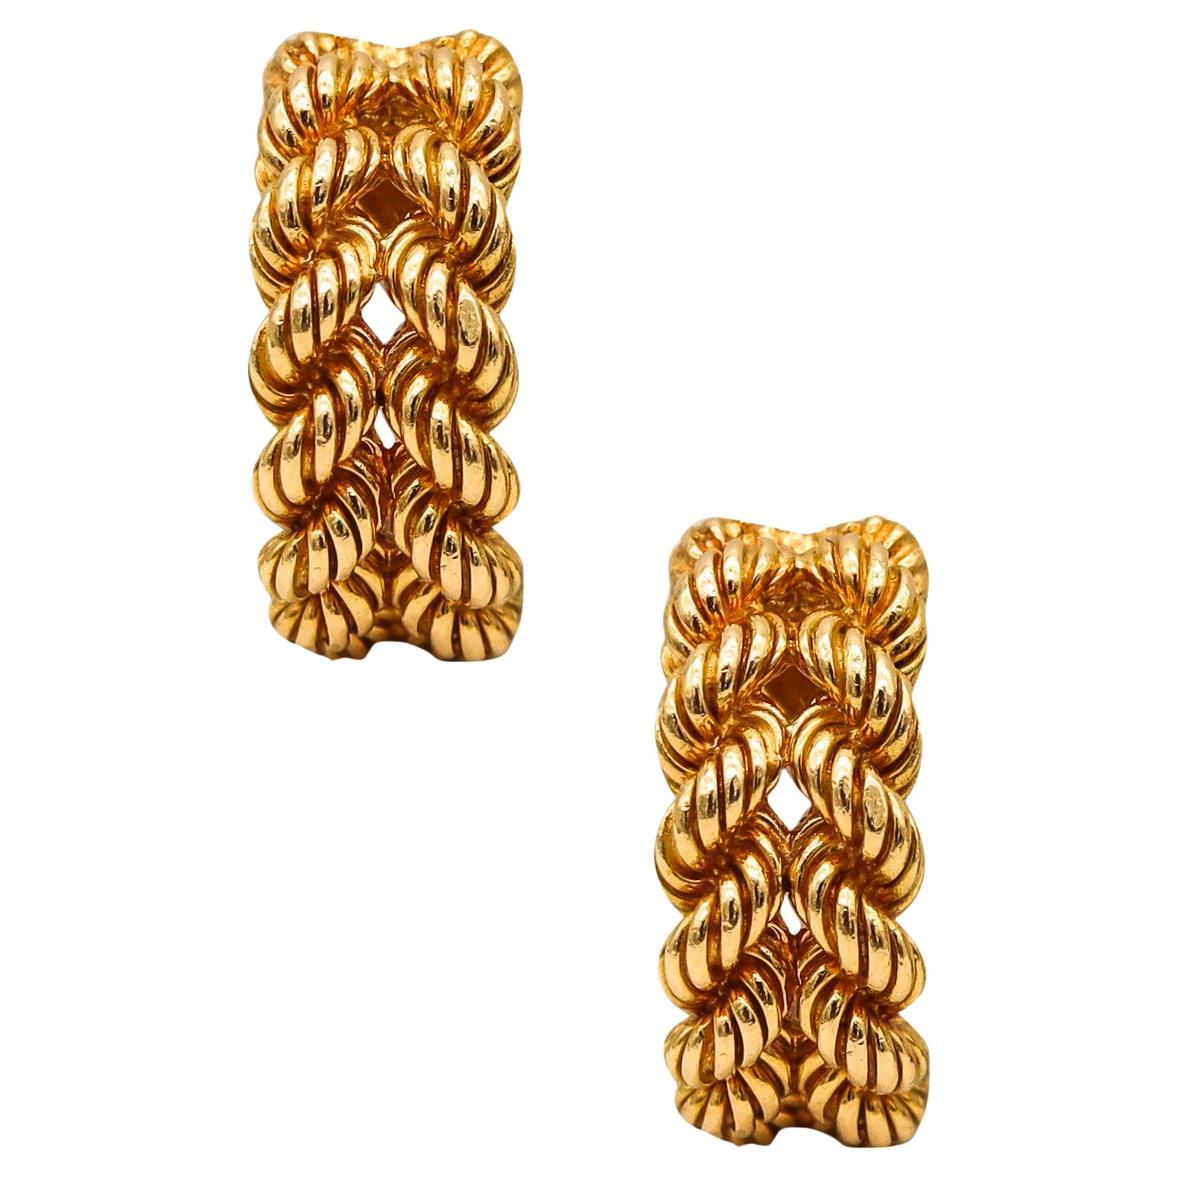 Hermes Paris 1970 Twisted Wires Clips on Earrings in Solid 18kt Yellow Gold